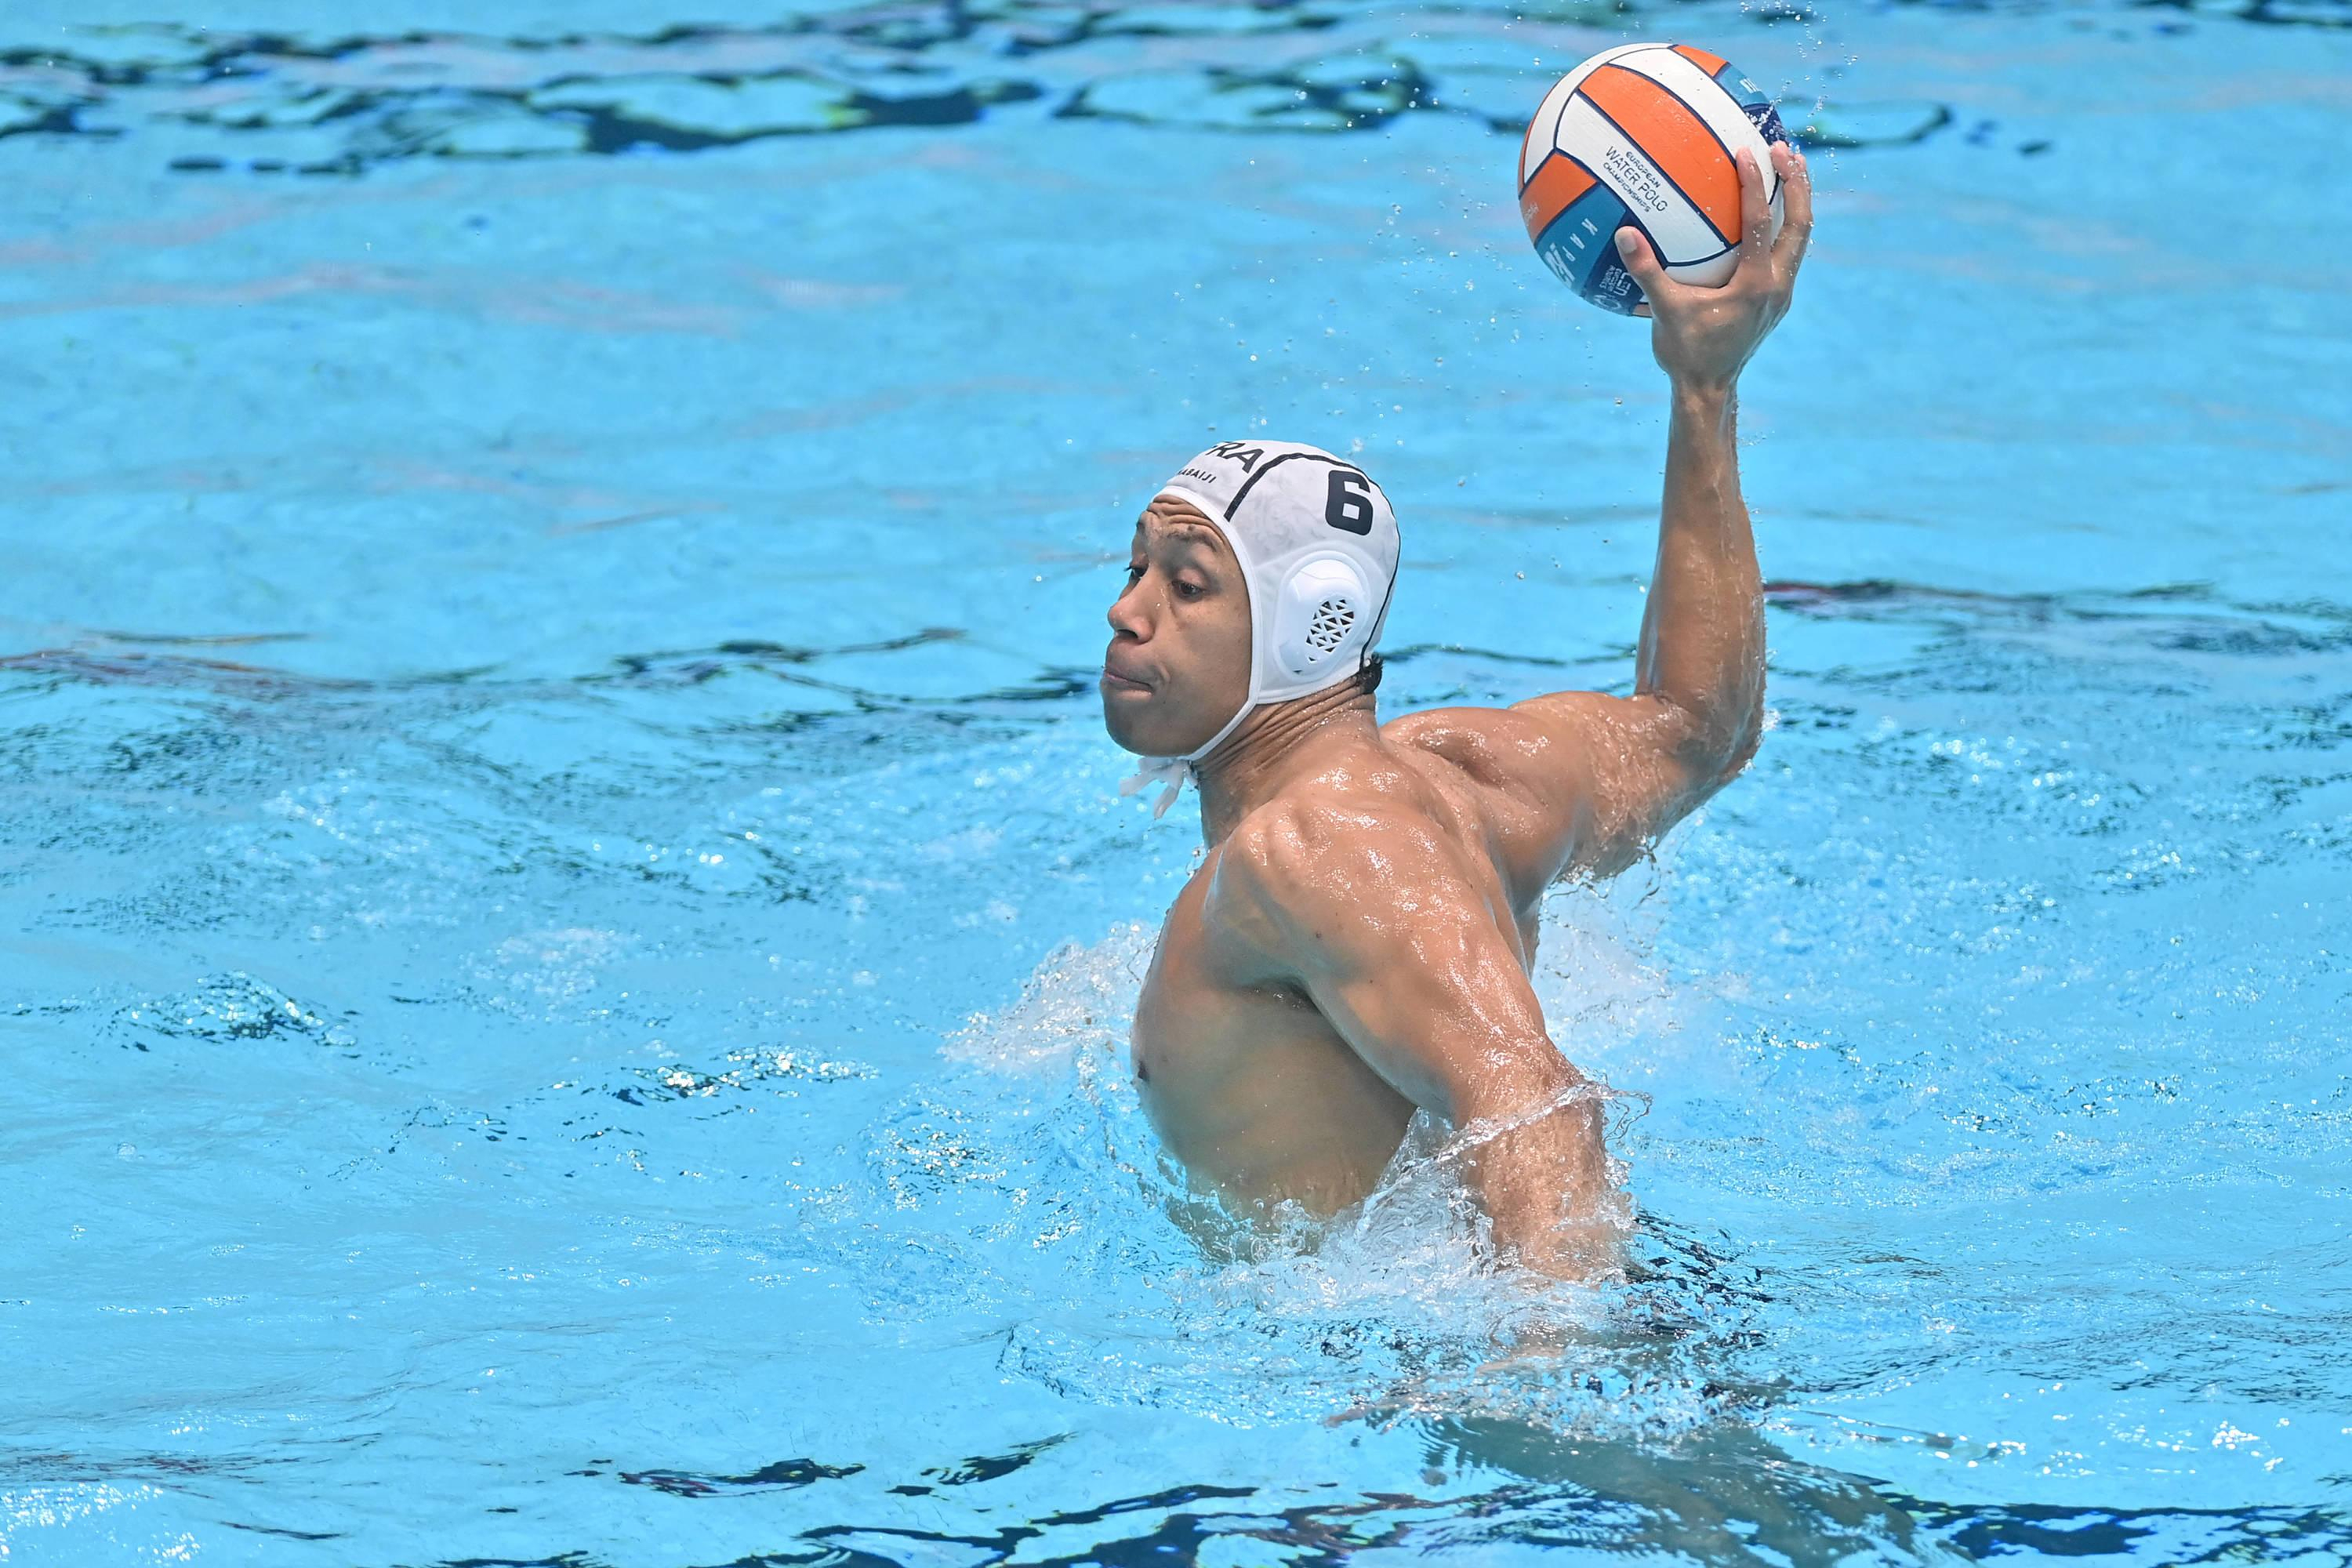 Water polo: the Blues dominate Brazil to start their world championship